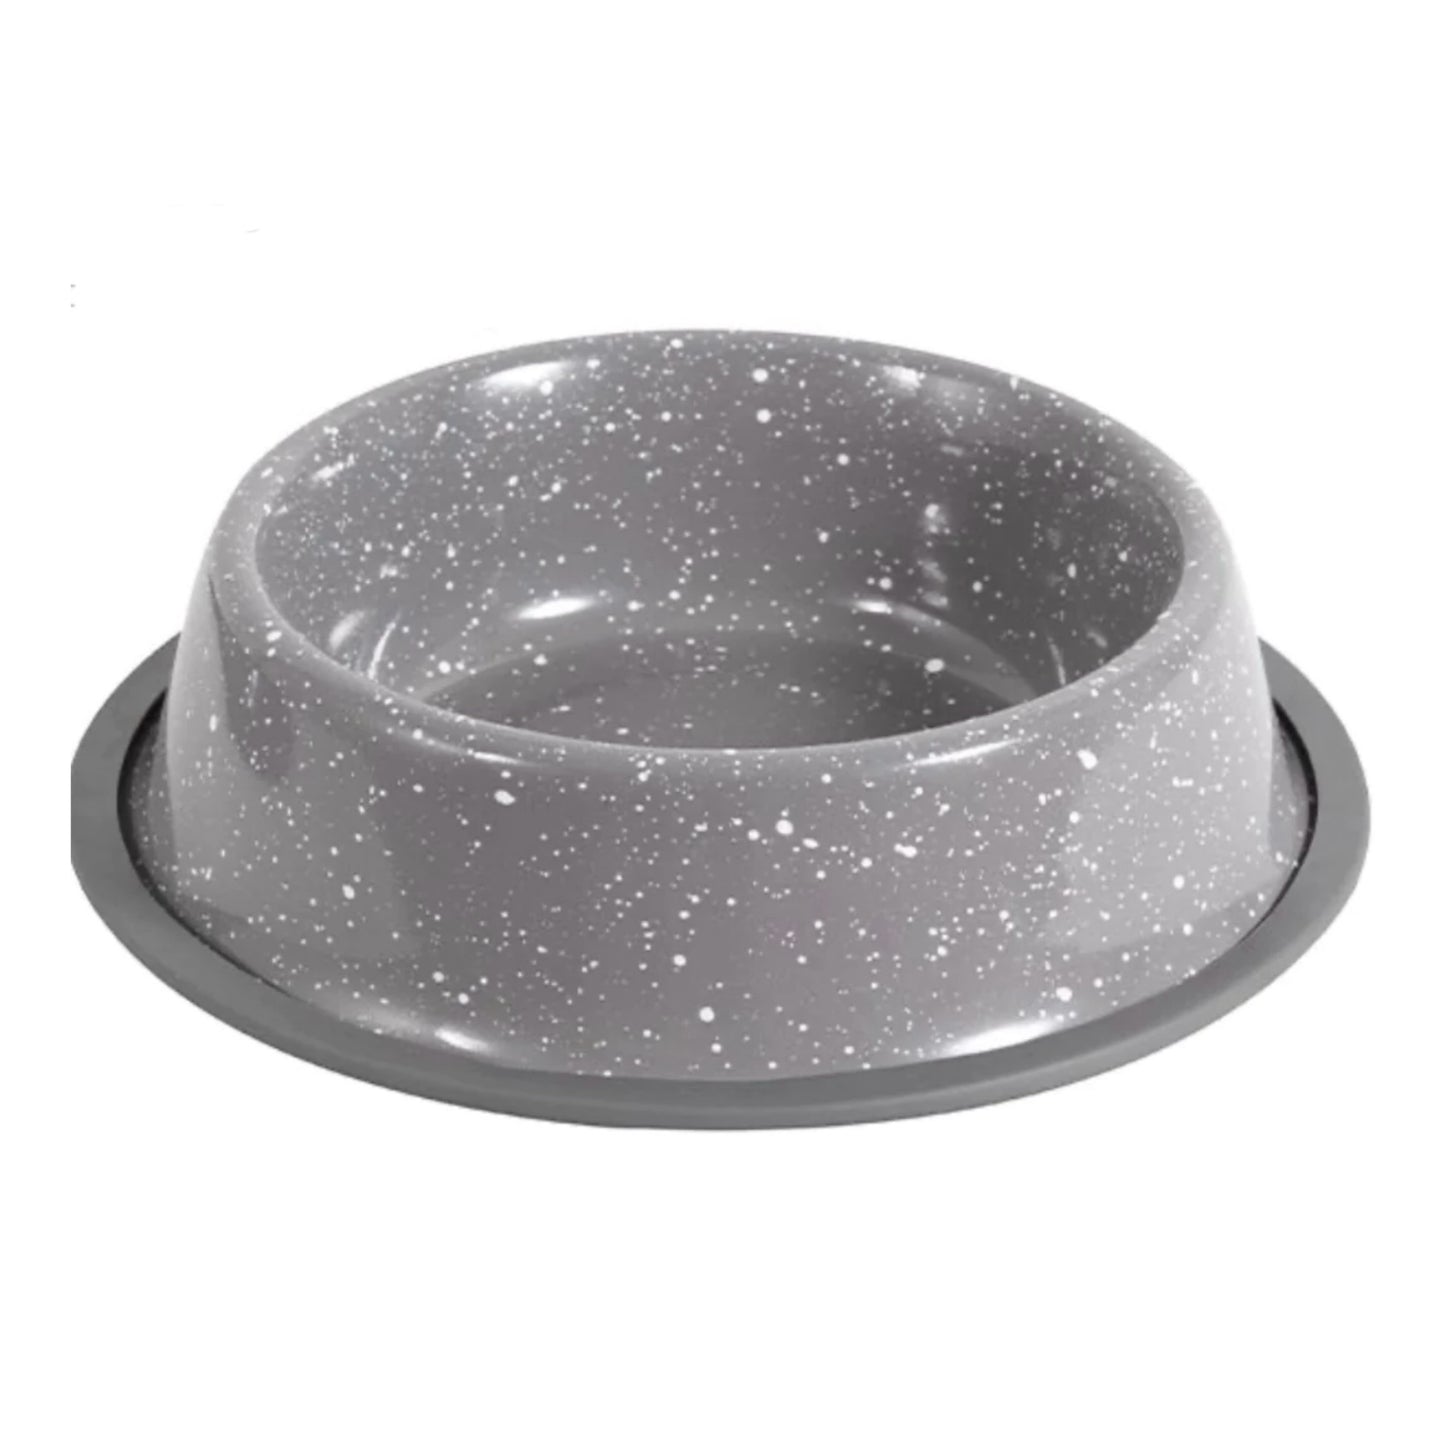 SMART CHOICE Speckled Stainless Steel Pet Bowl 900ML